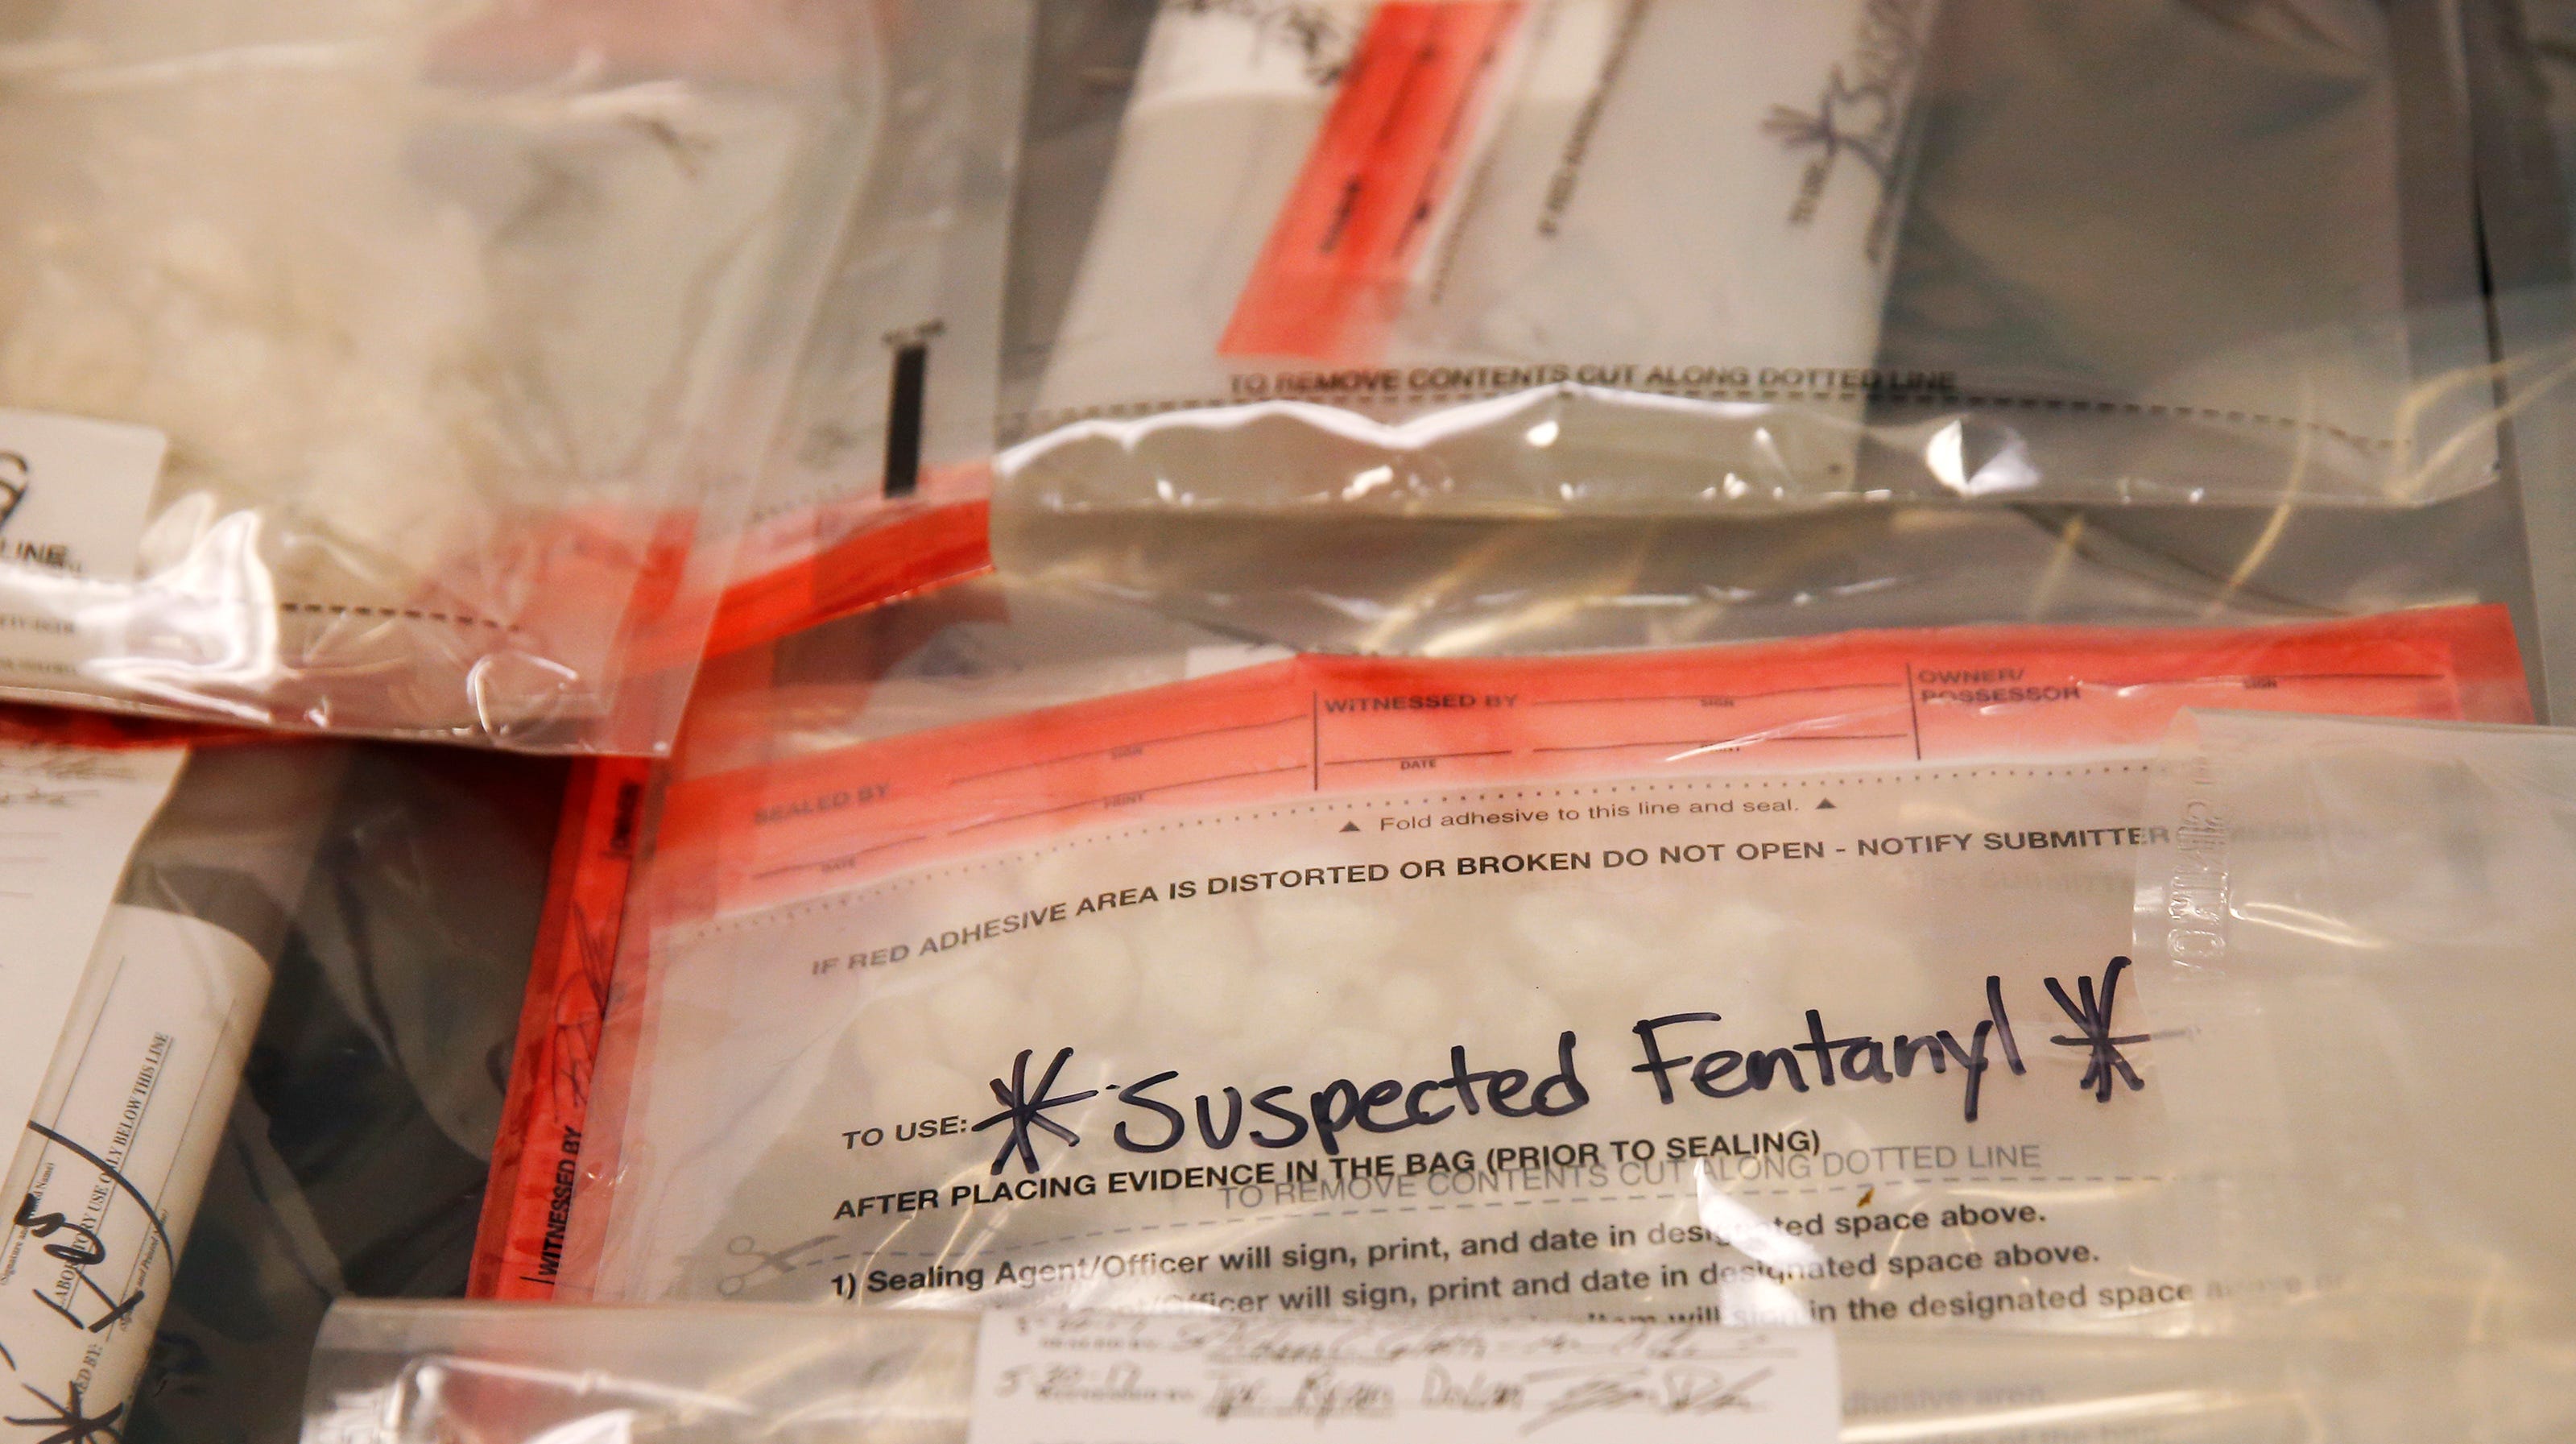 fentanyl-overdose-can-t-happen-by-just-touching-the-drug-experts-say